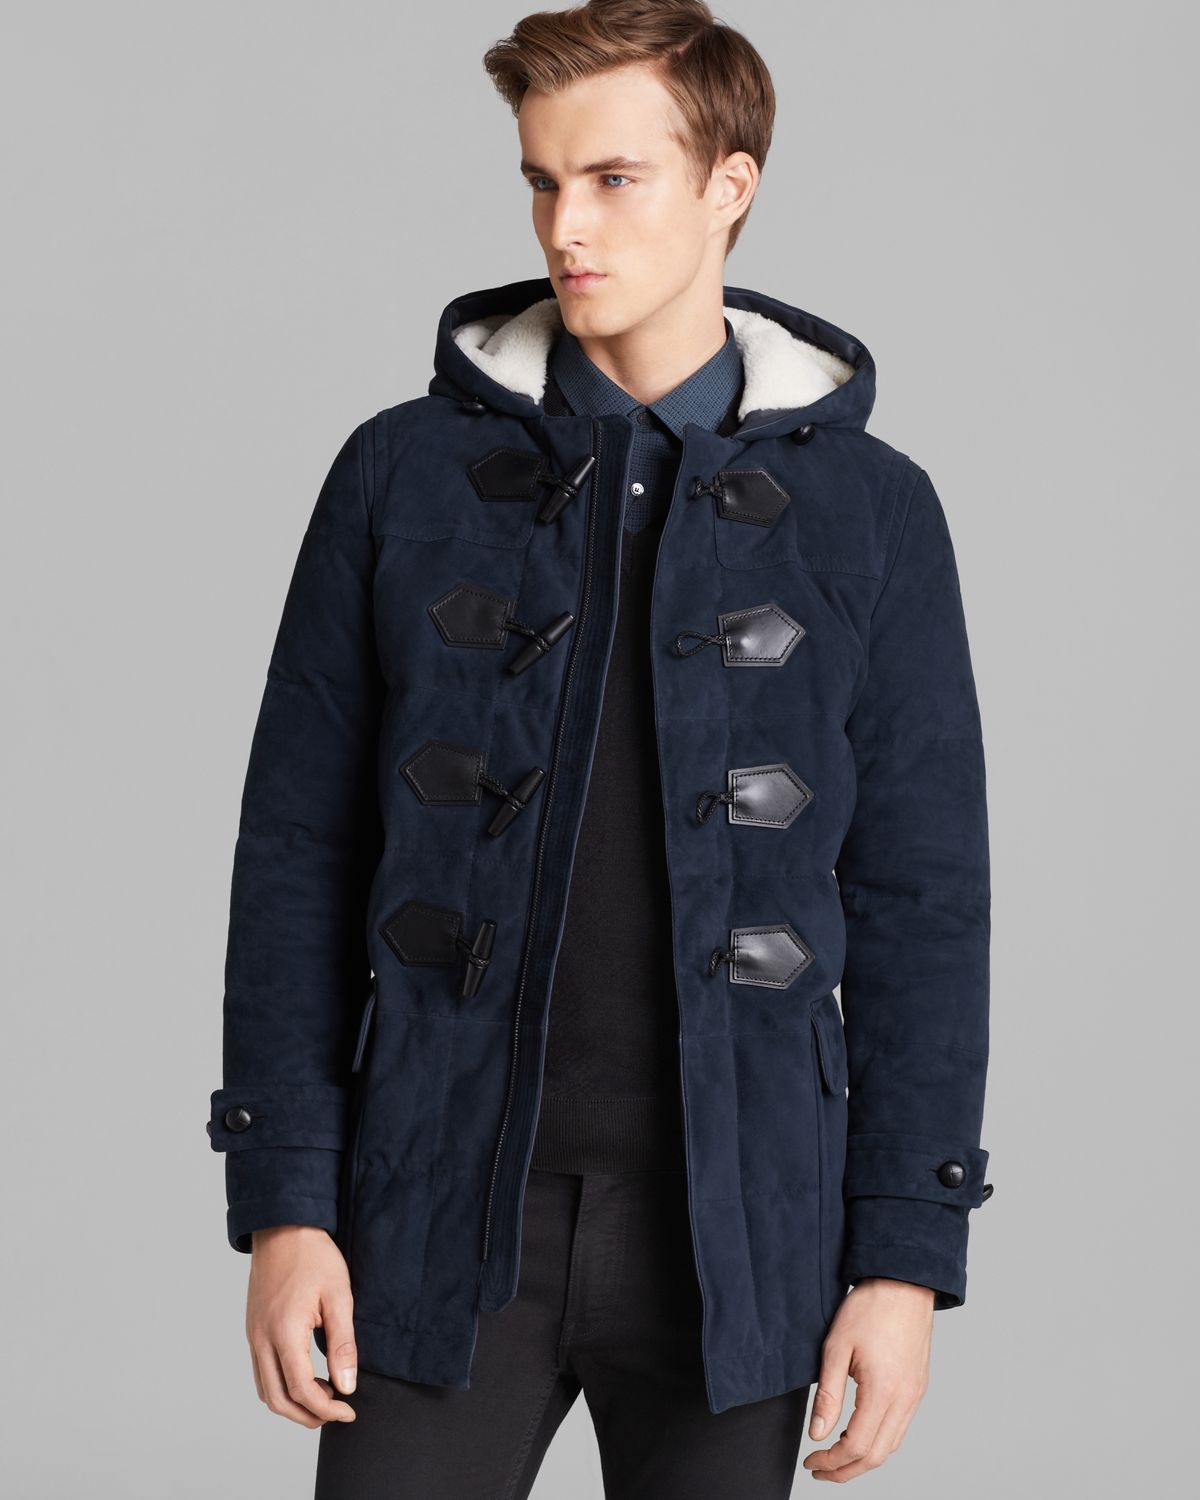 Lyst - Burberry London Montville Suede Toggle Coat in Blue for Men